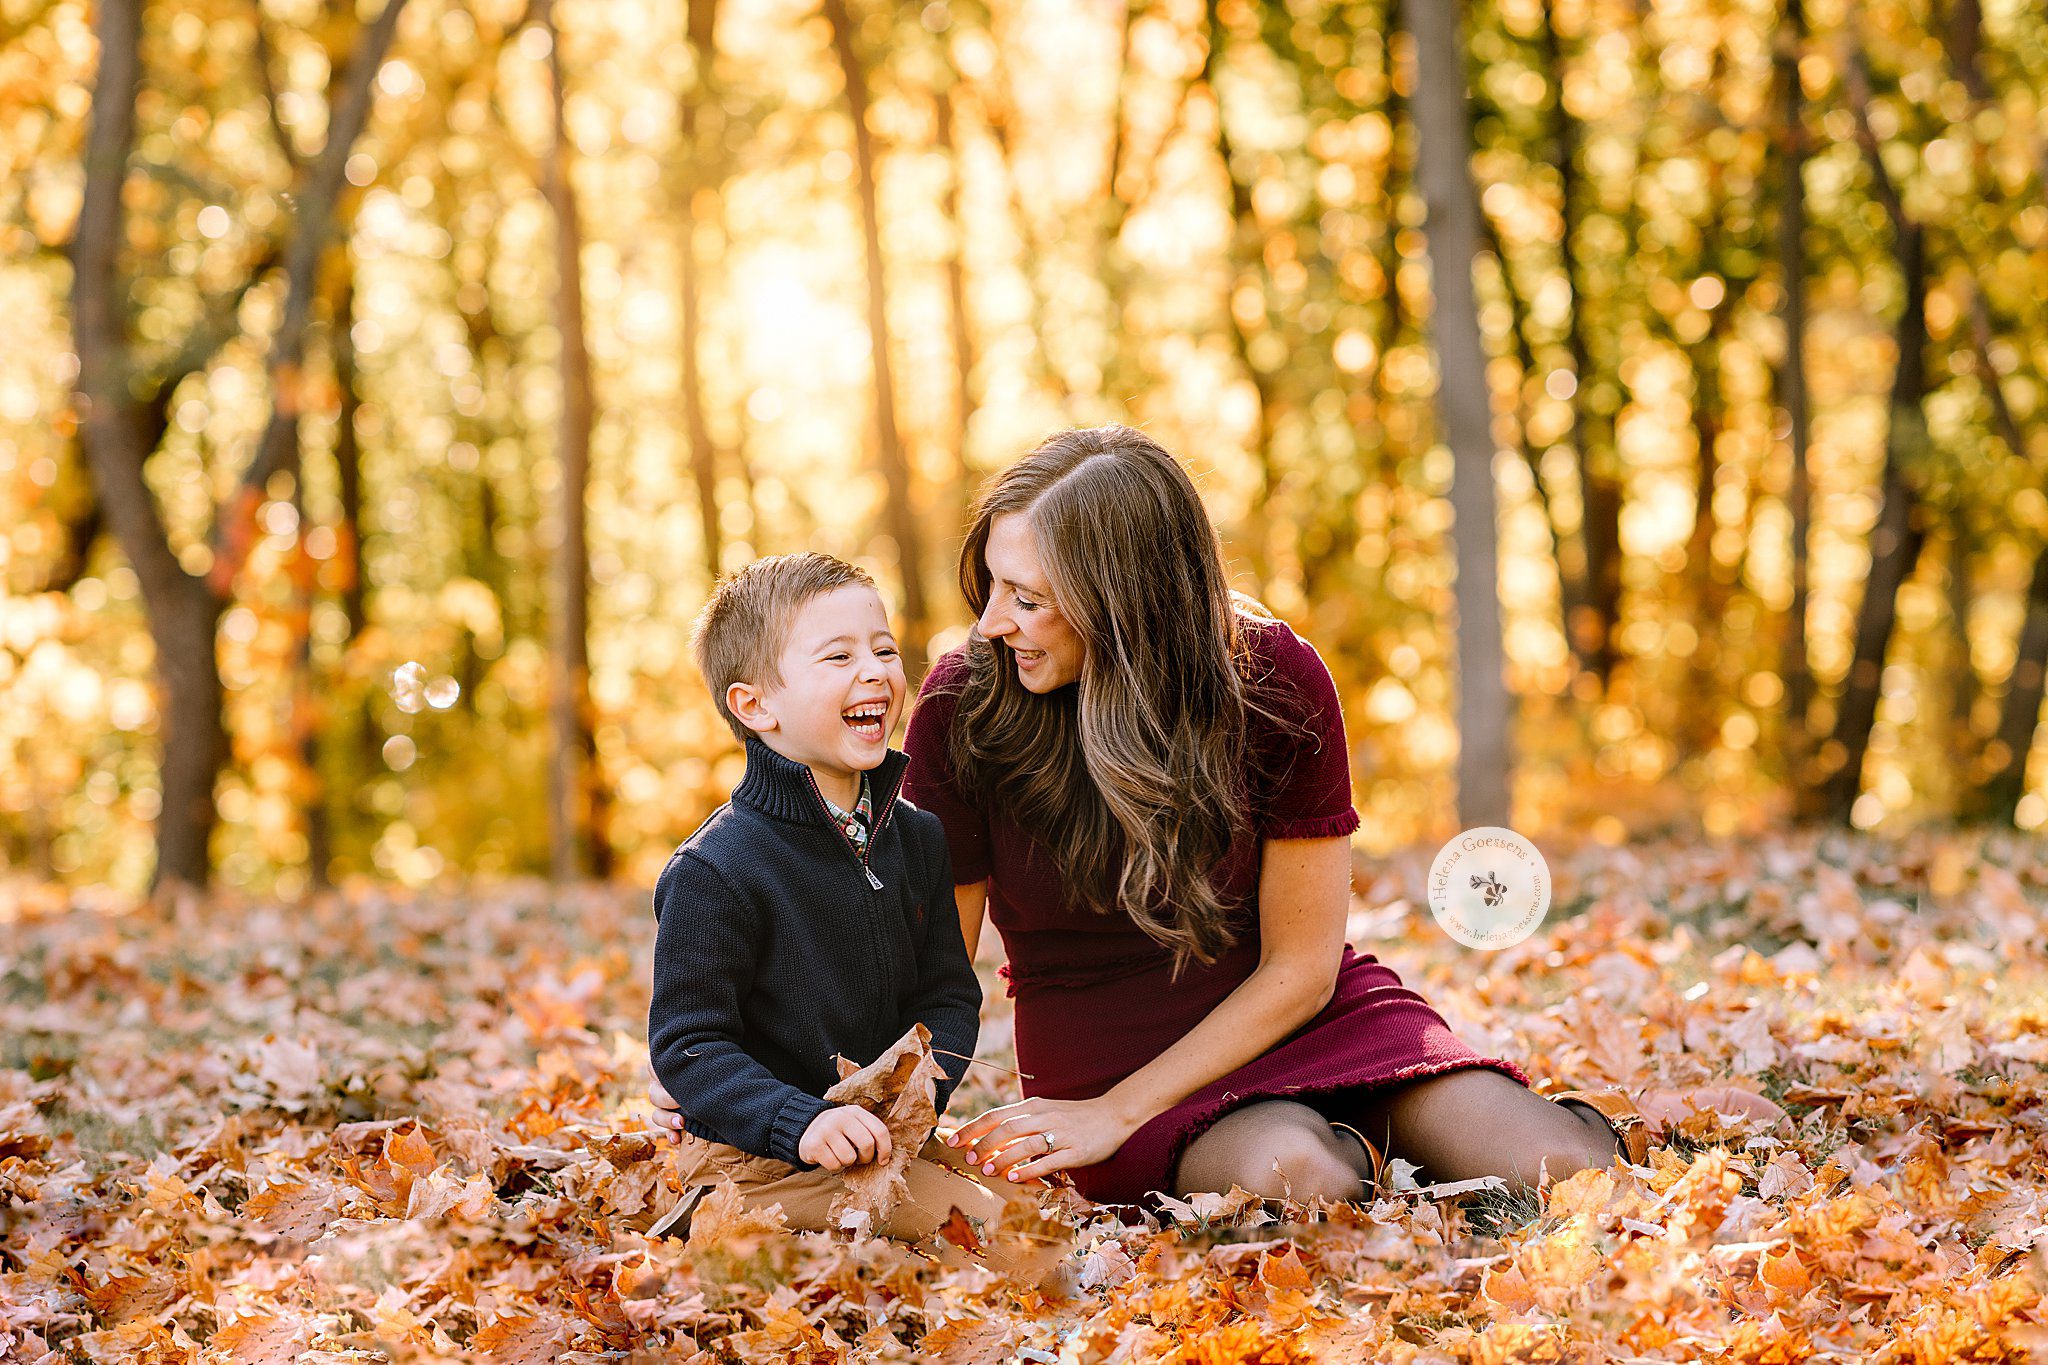 Helena Goessens Photography photographs mom and son laughing in leaves at Larz Anderson Park